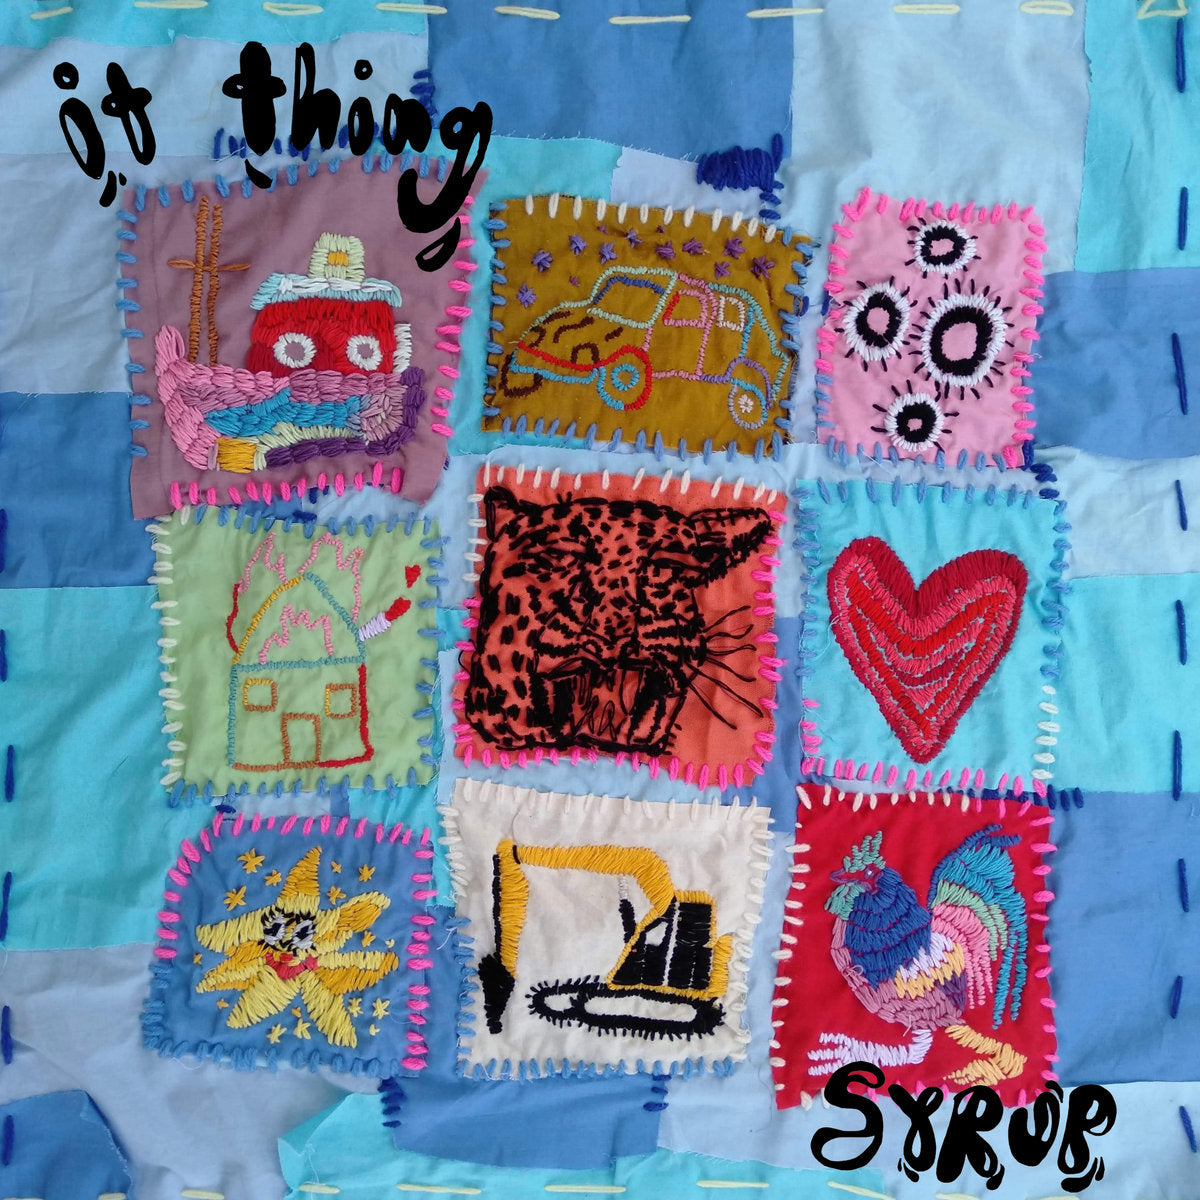 IT THING - "SYRUP" LP